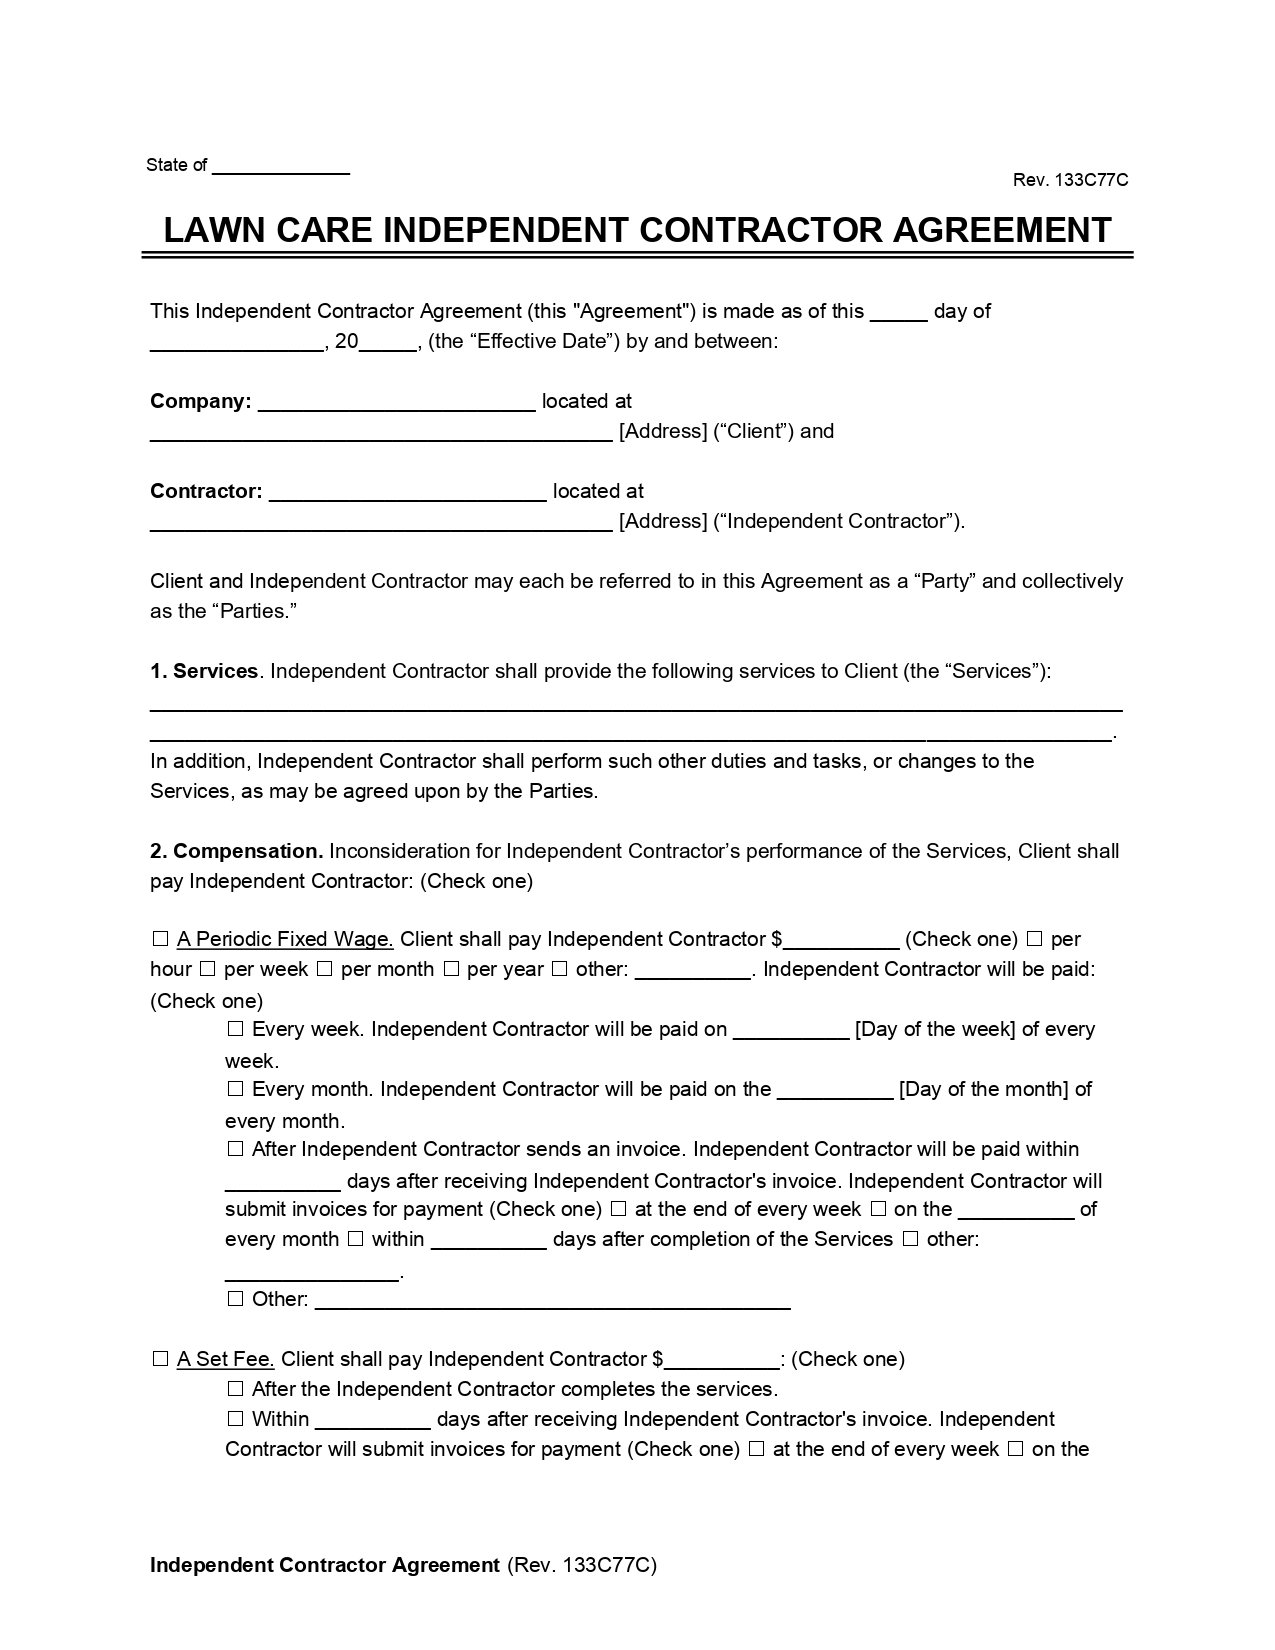 Lawn Care Independent Contractor Agreement